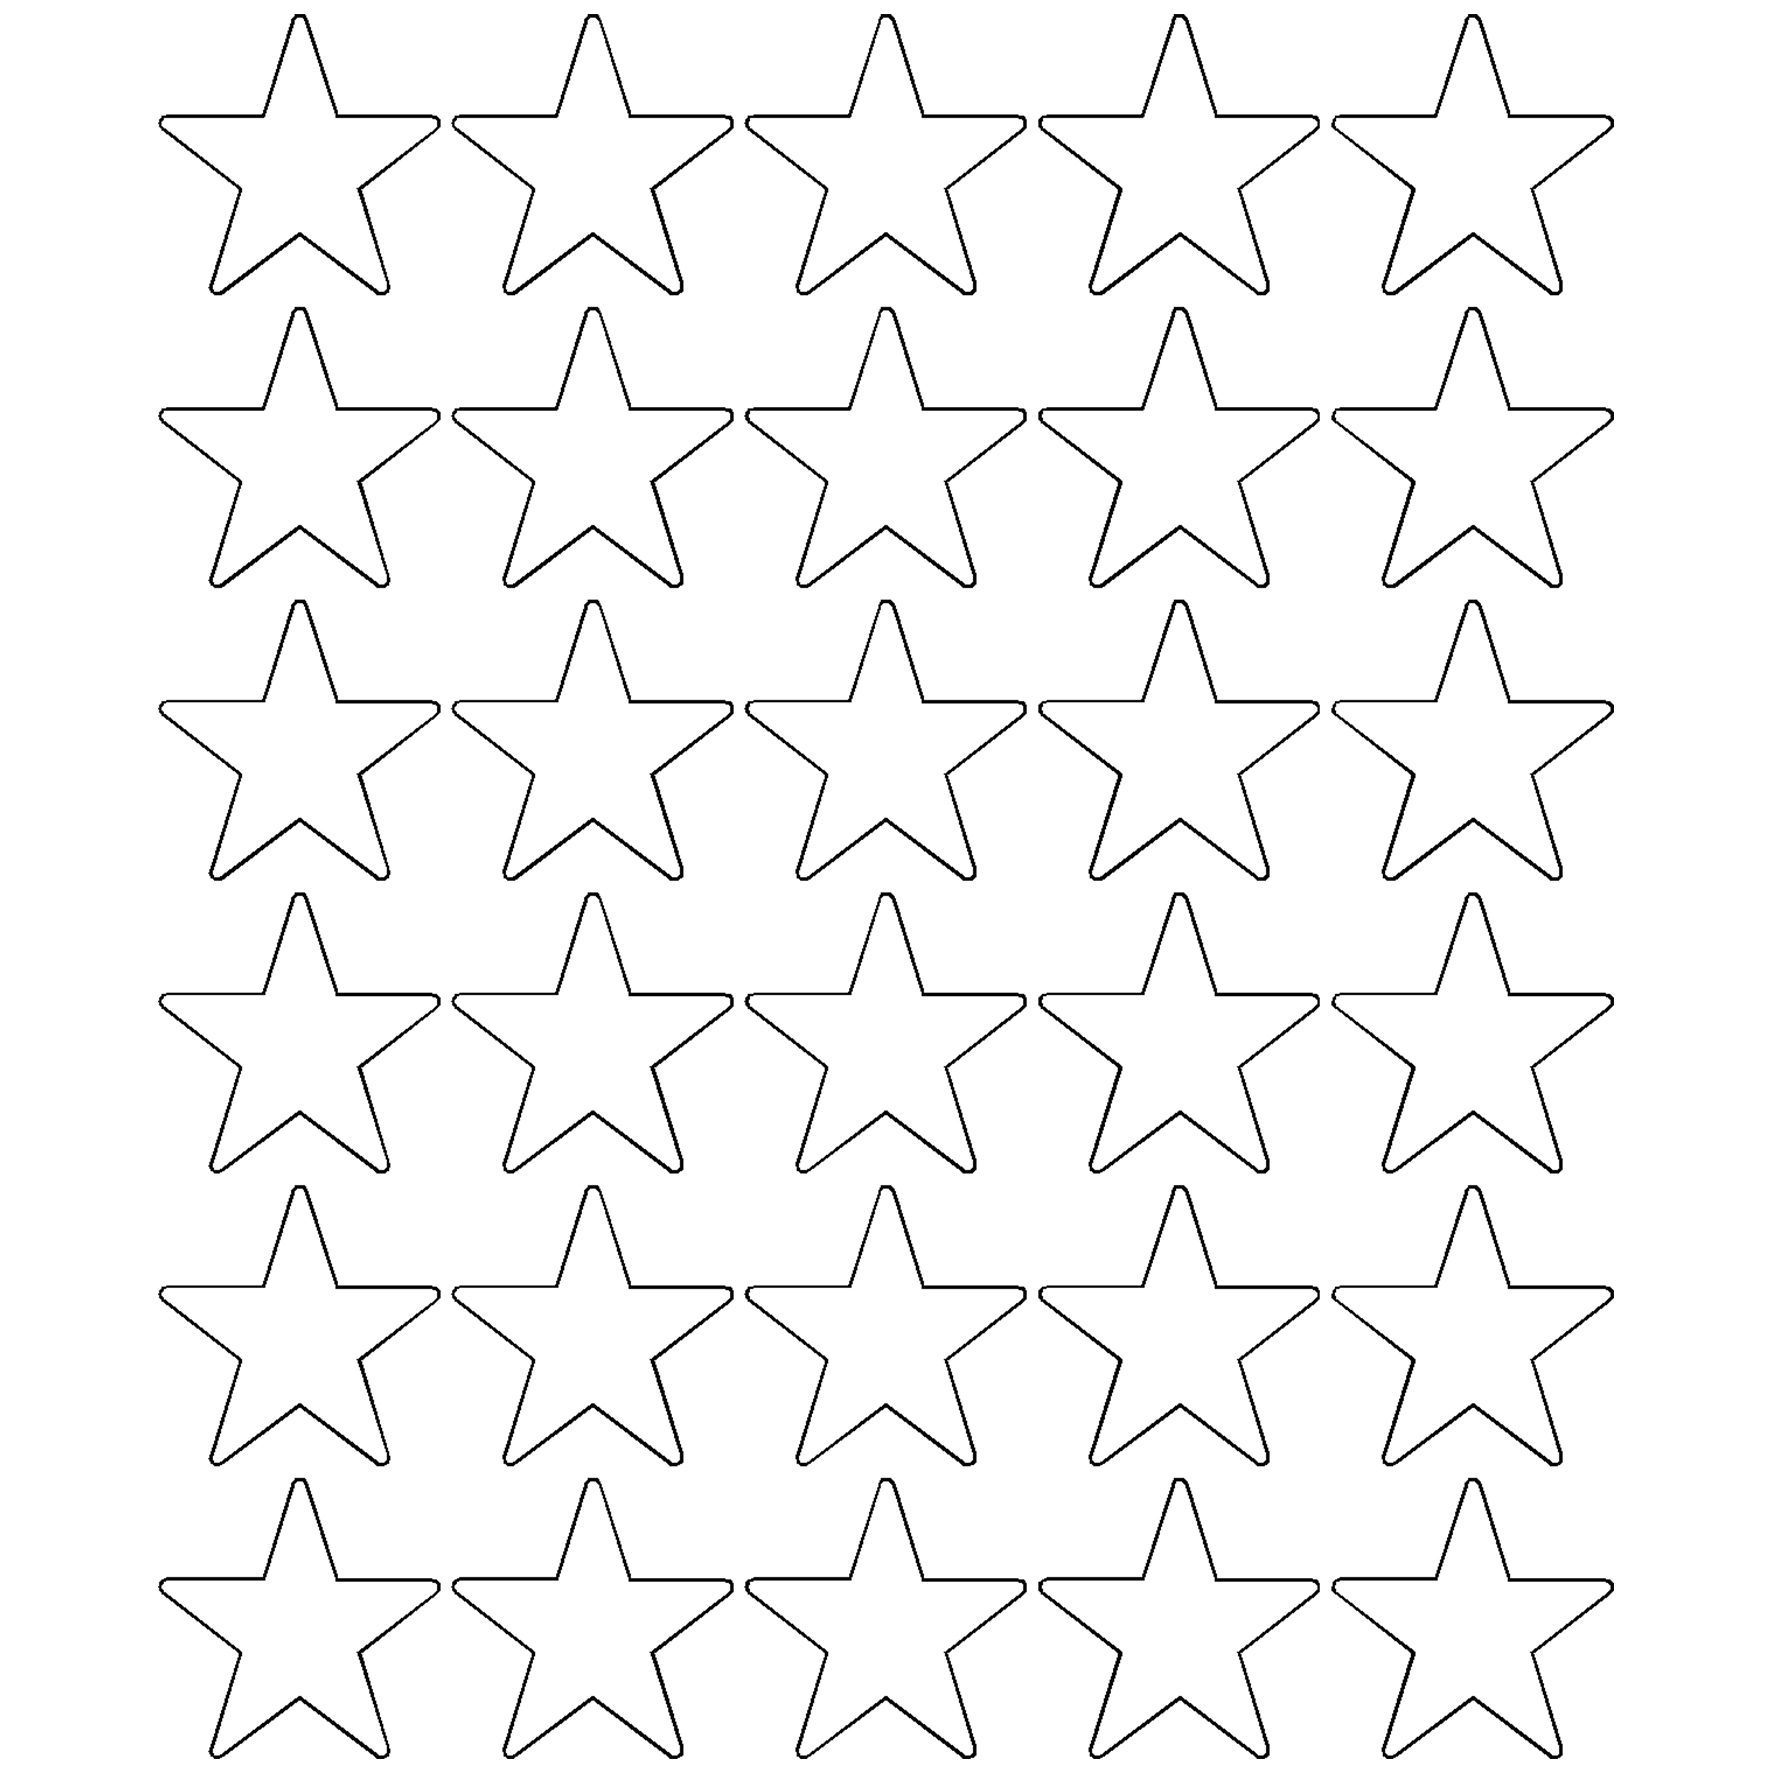 30x 80mm Stars - Catering Signs UK